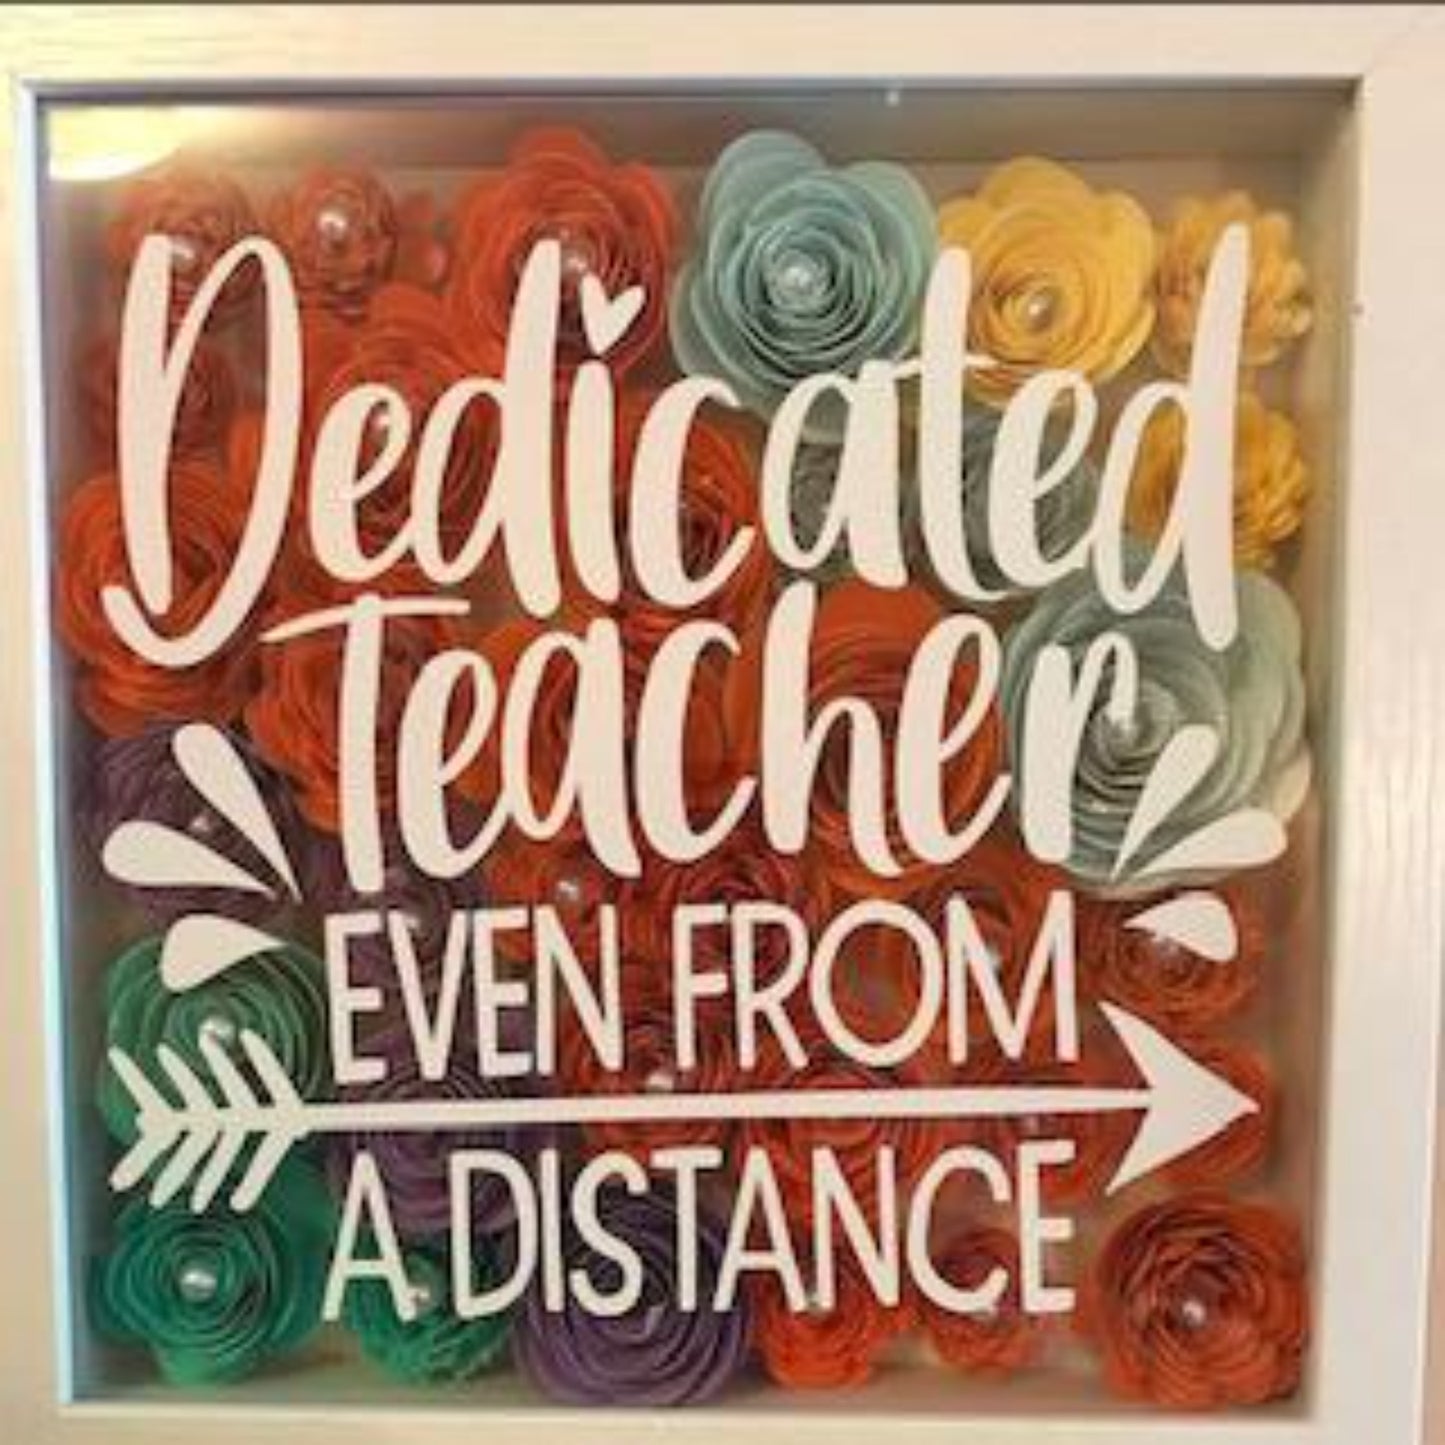 Full of Flowers "Dedicated Teacher Even From A Distance"